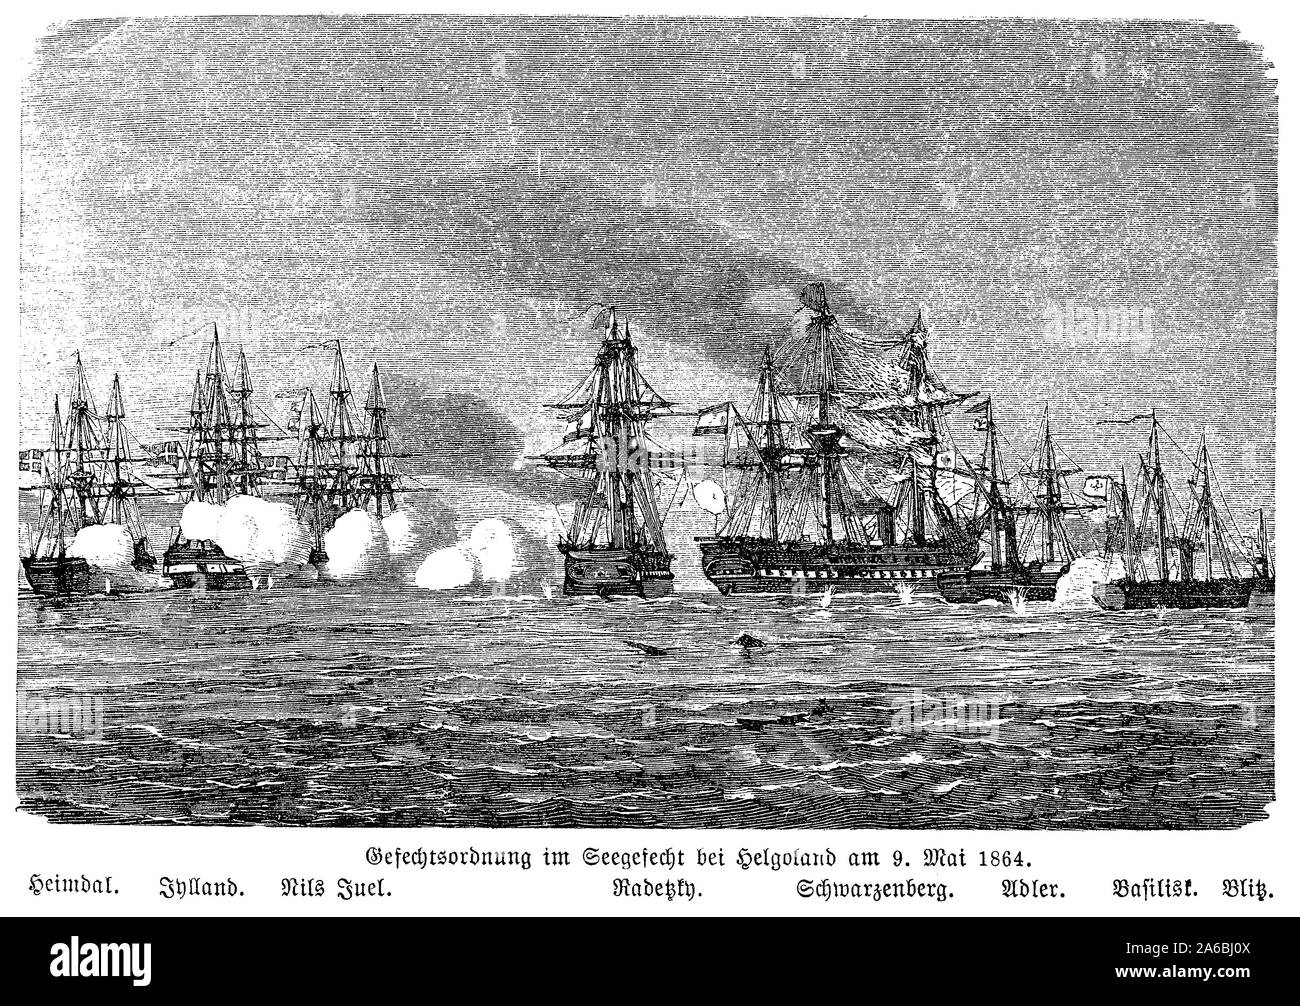 Battle of Heligoland (Helgoland) on 9 May 1864 between a Danish squadron and a joint Austro-Prussian navy fleet. The Danes had a tactical victory and an armistice came into effect. Stock Photo